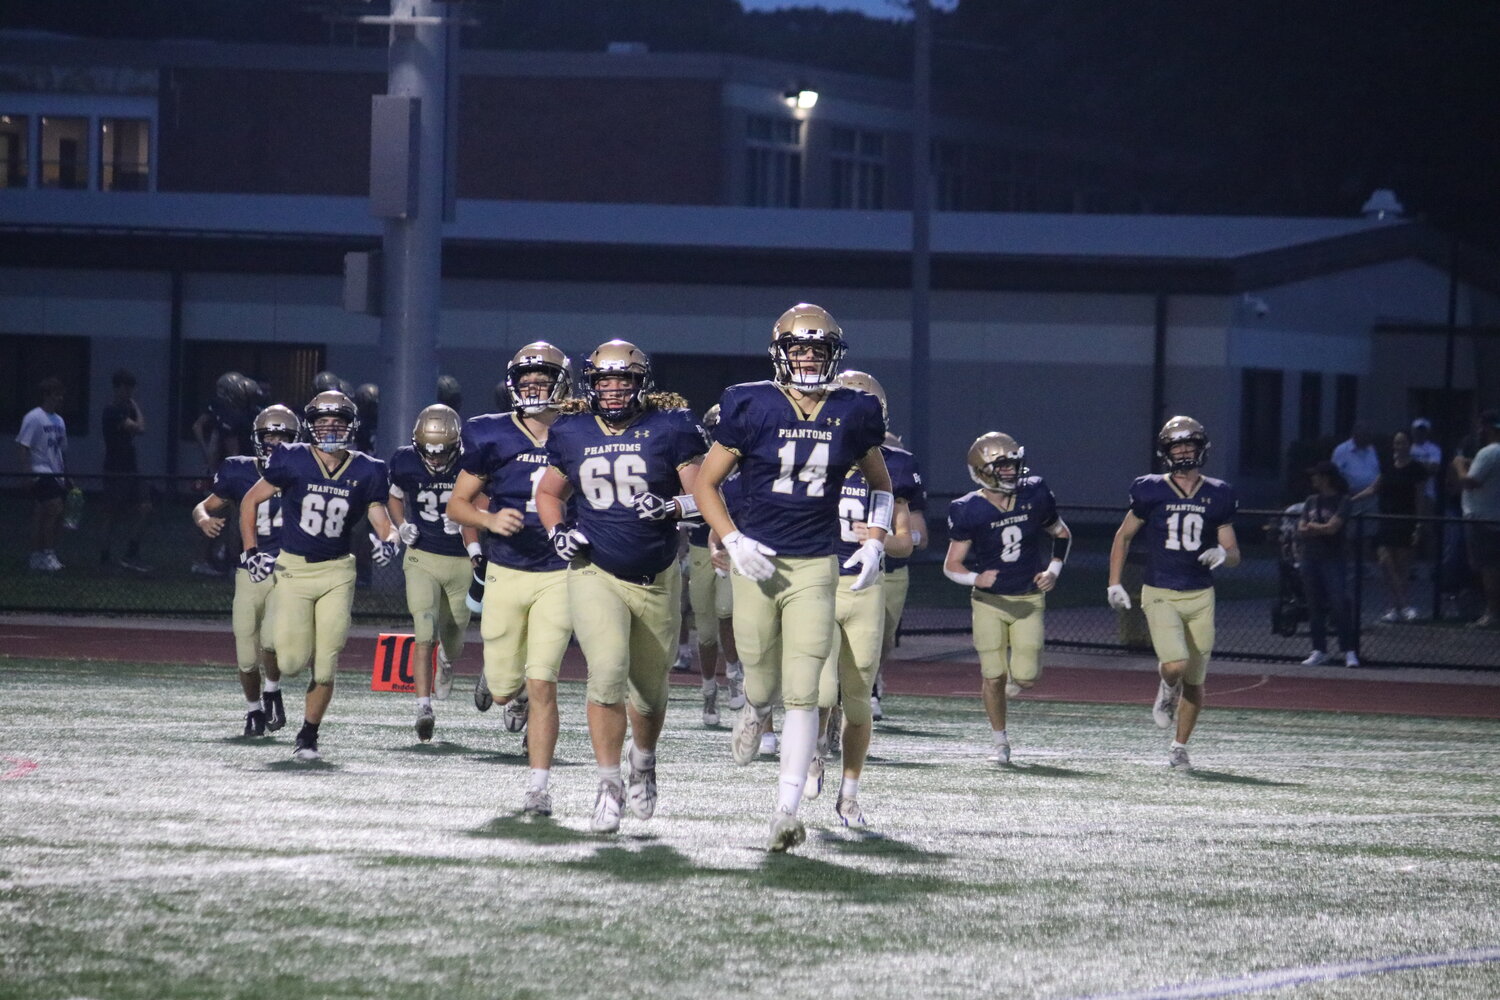 With high expectations for the Bayport-Blue Point football team after last year’s unprecedented season, the new Phantoms develop their “own identity,” according to head coach, Michael Zafonte.